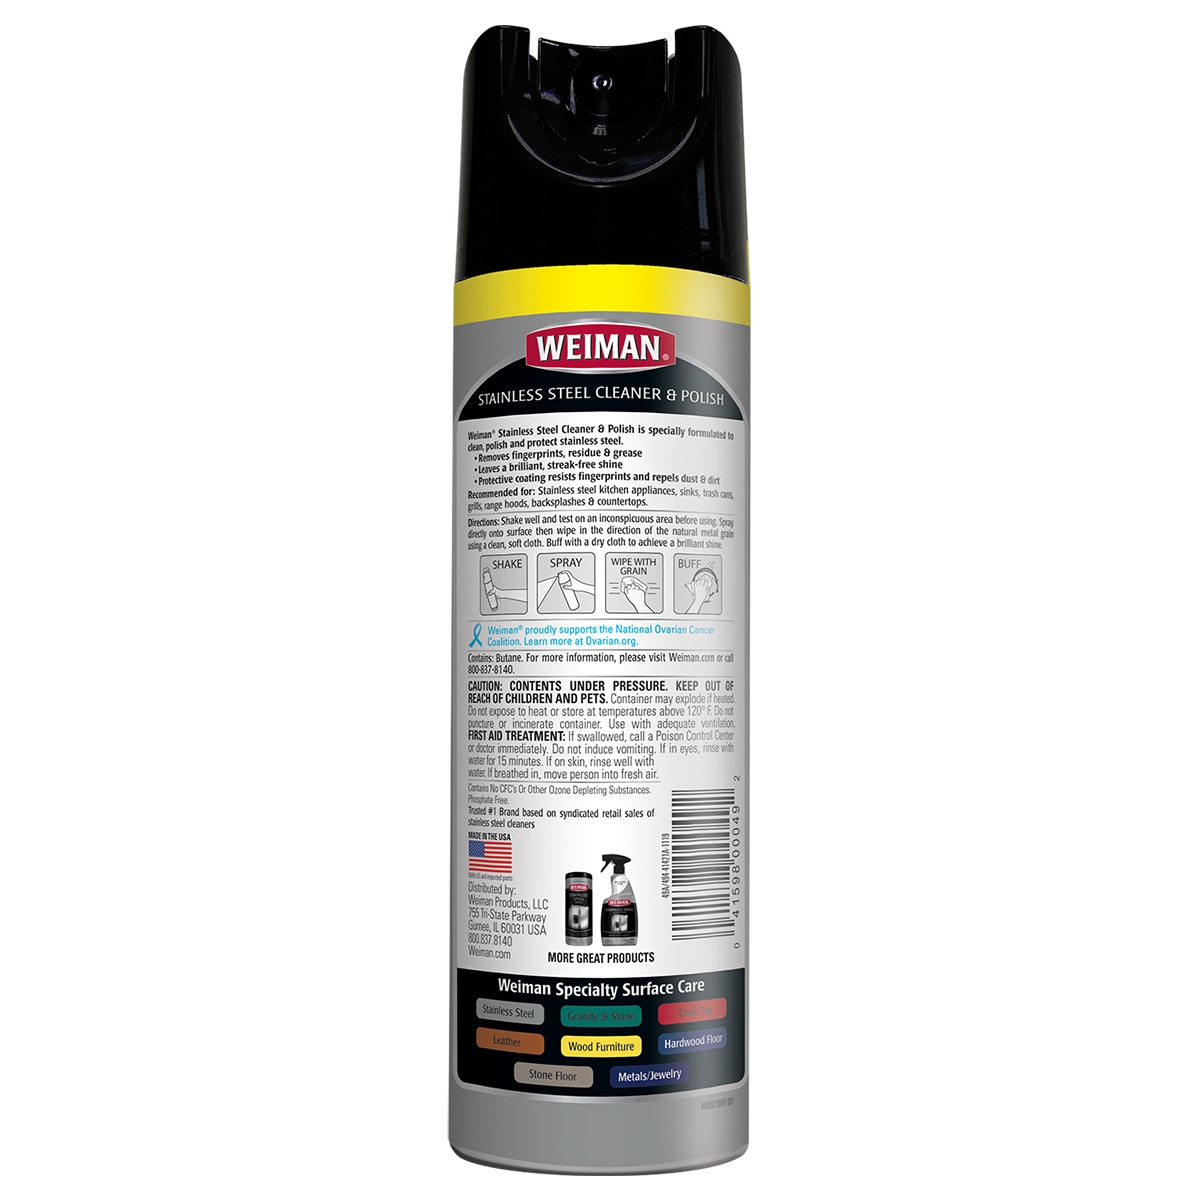 Reviews for Weiman 22 oz. Stainless Steel Cleaner and Polish Spray